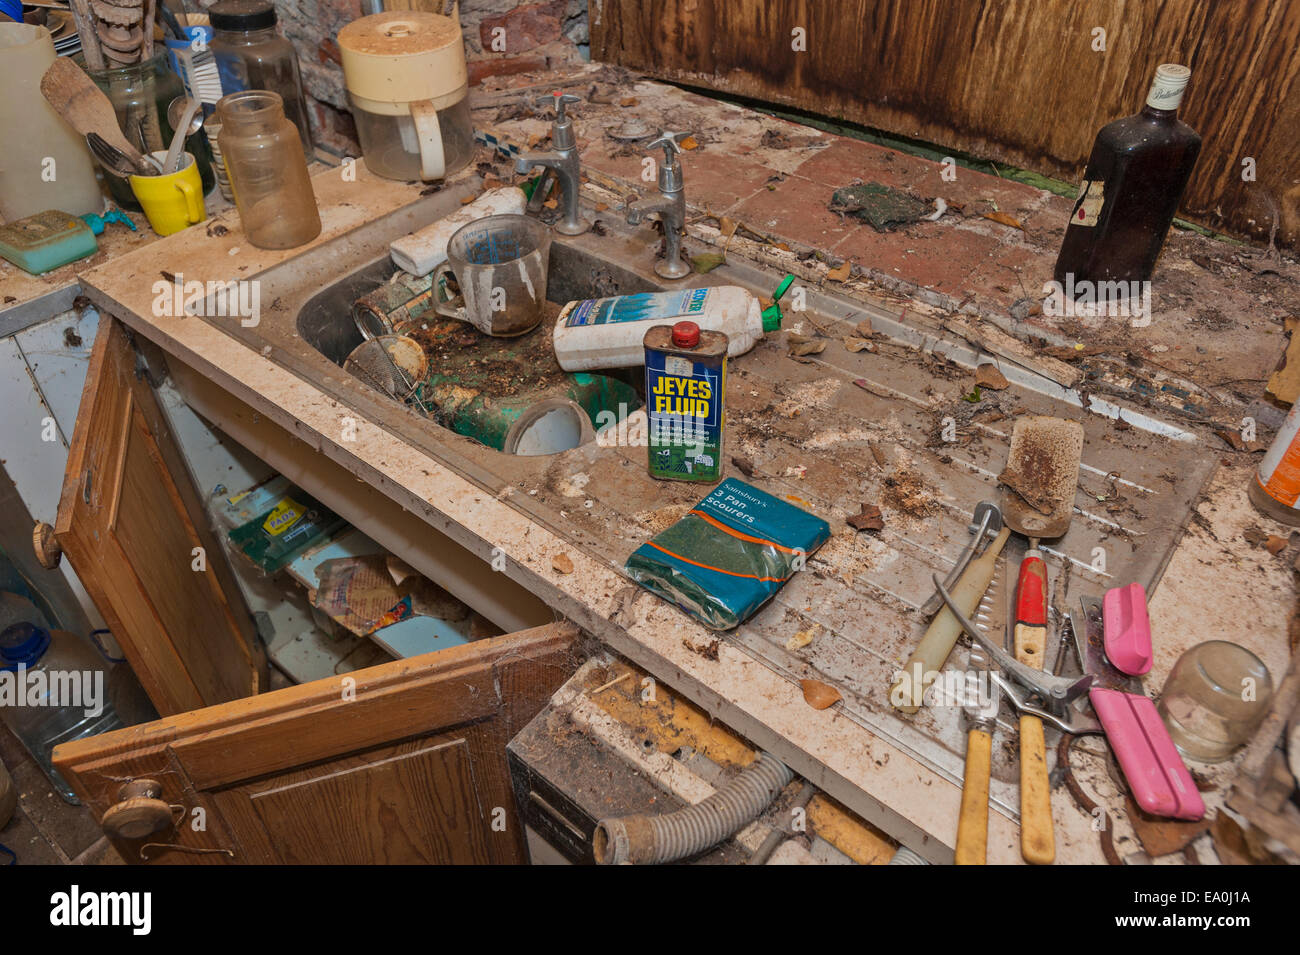 The sink and worktop in the kitchen of a derelict and abandoned house Stock Photo